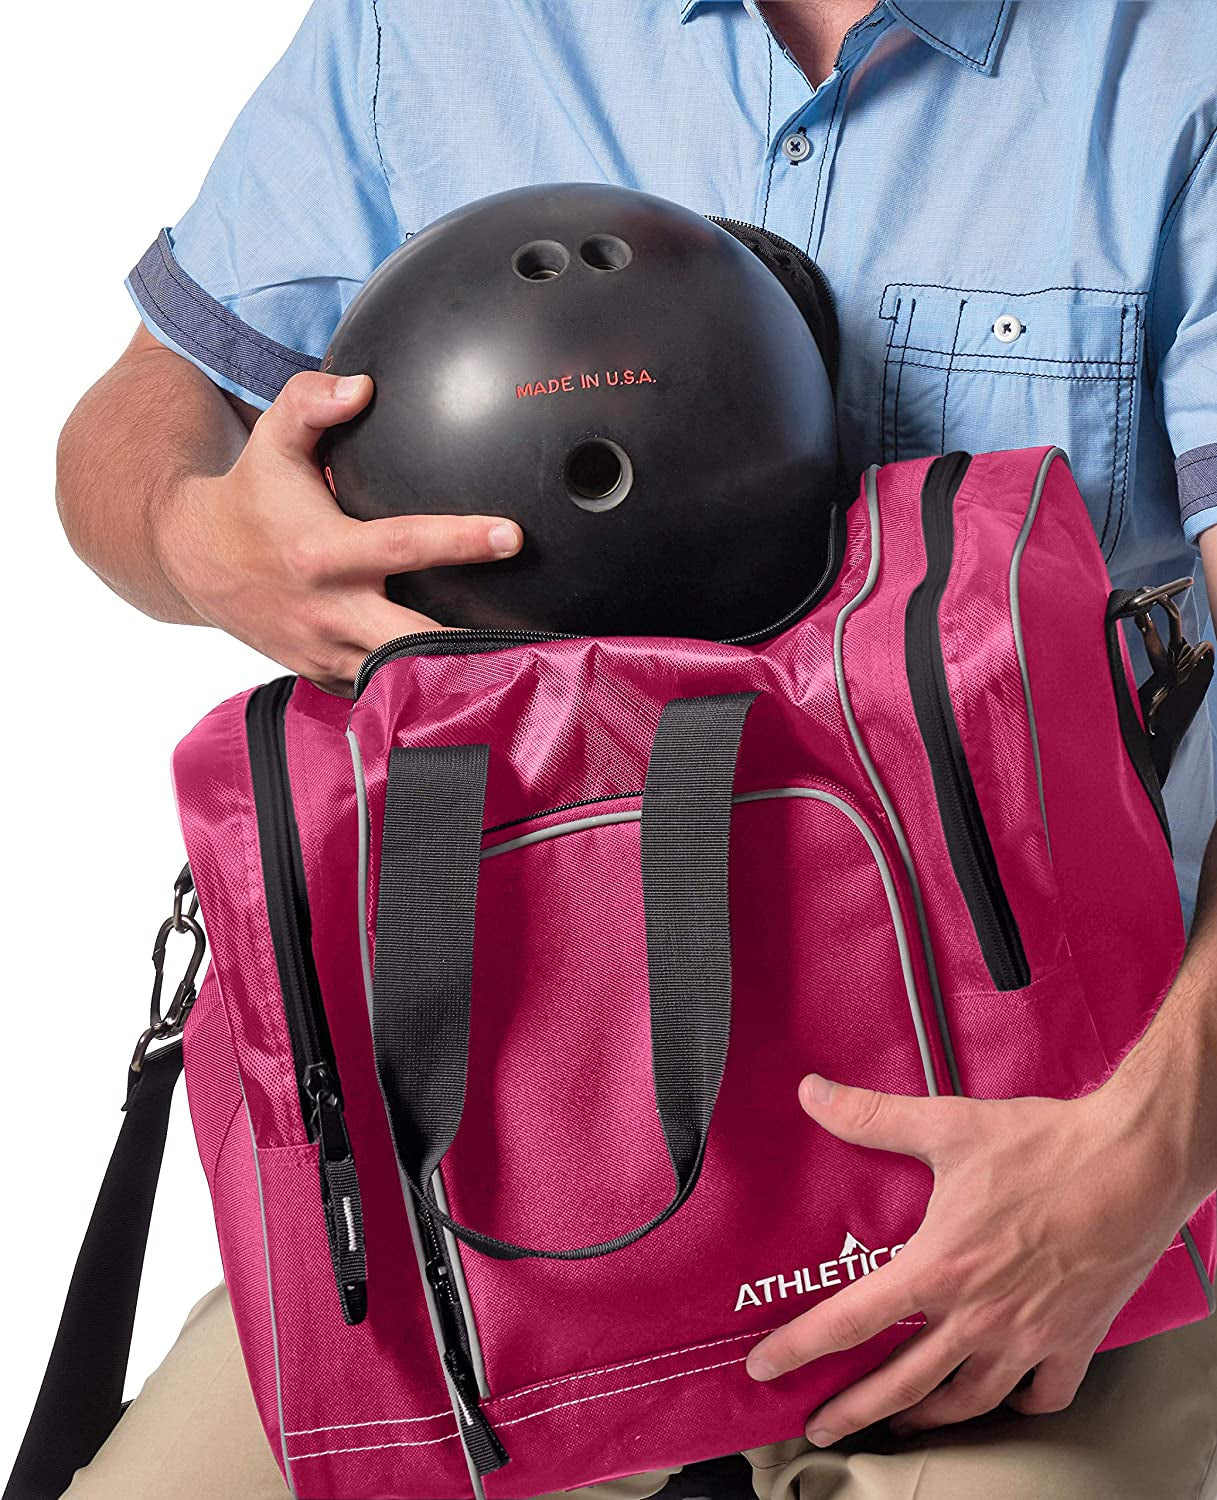 "Stylish Strike - High-Quality Single Ball Bowling Bag with Cushioned Holder and Shoe Compartment - Perfect for Men's Size 14 Shoes!"